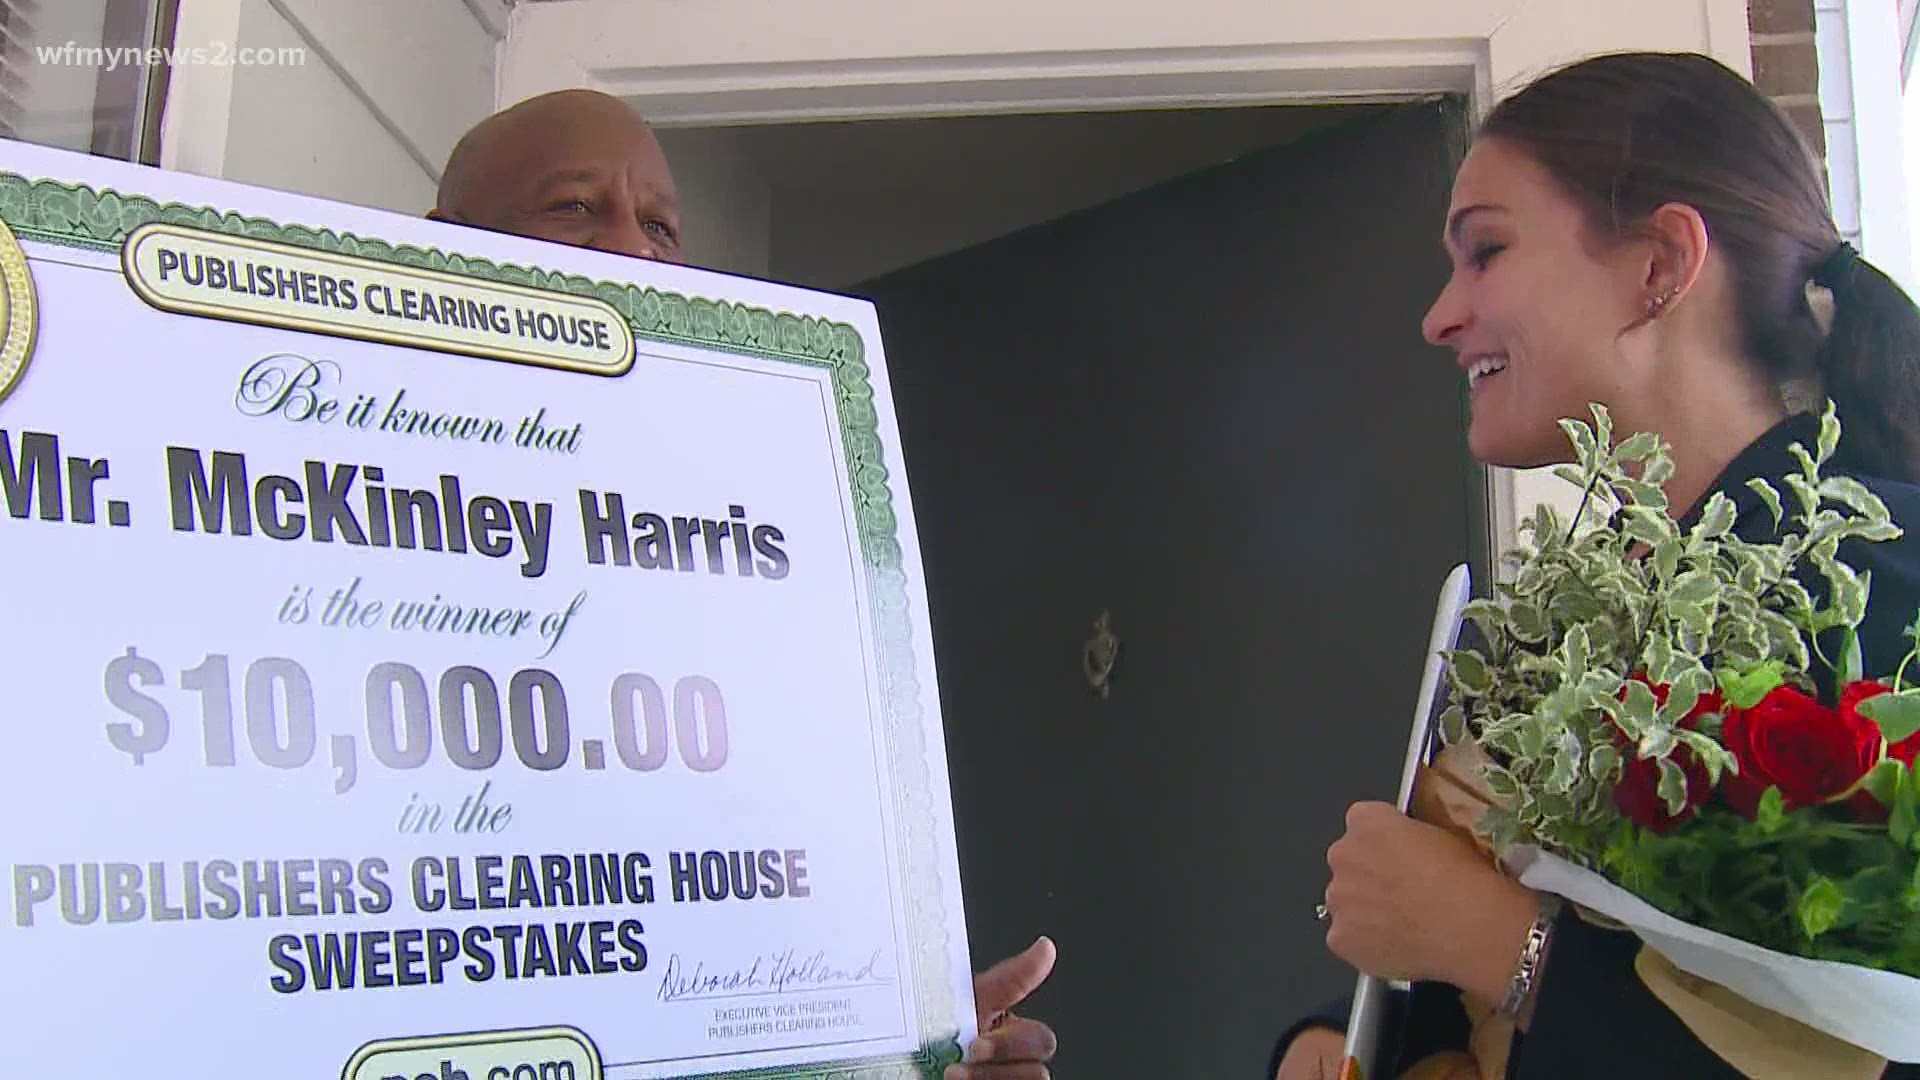 How to know if you've really won Publishers Clearing House